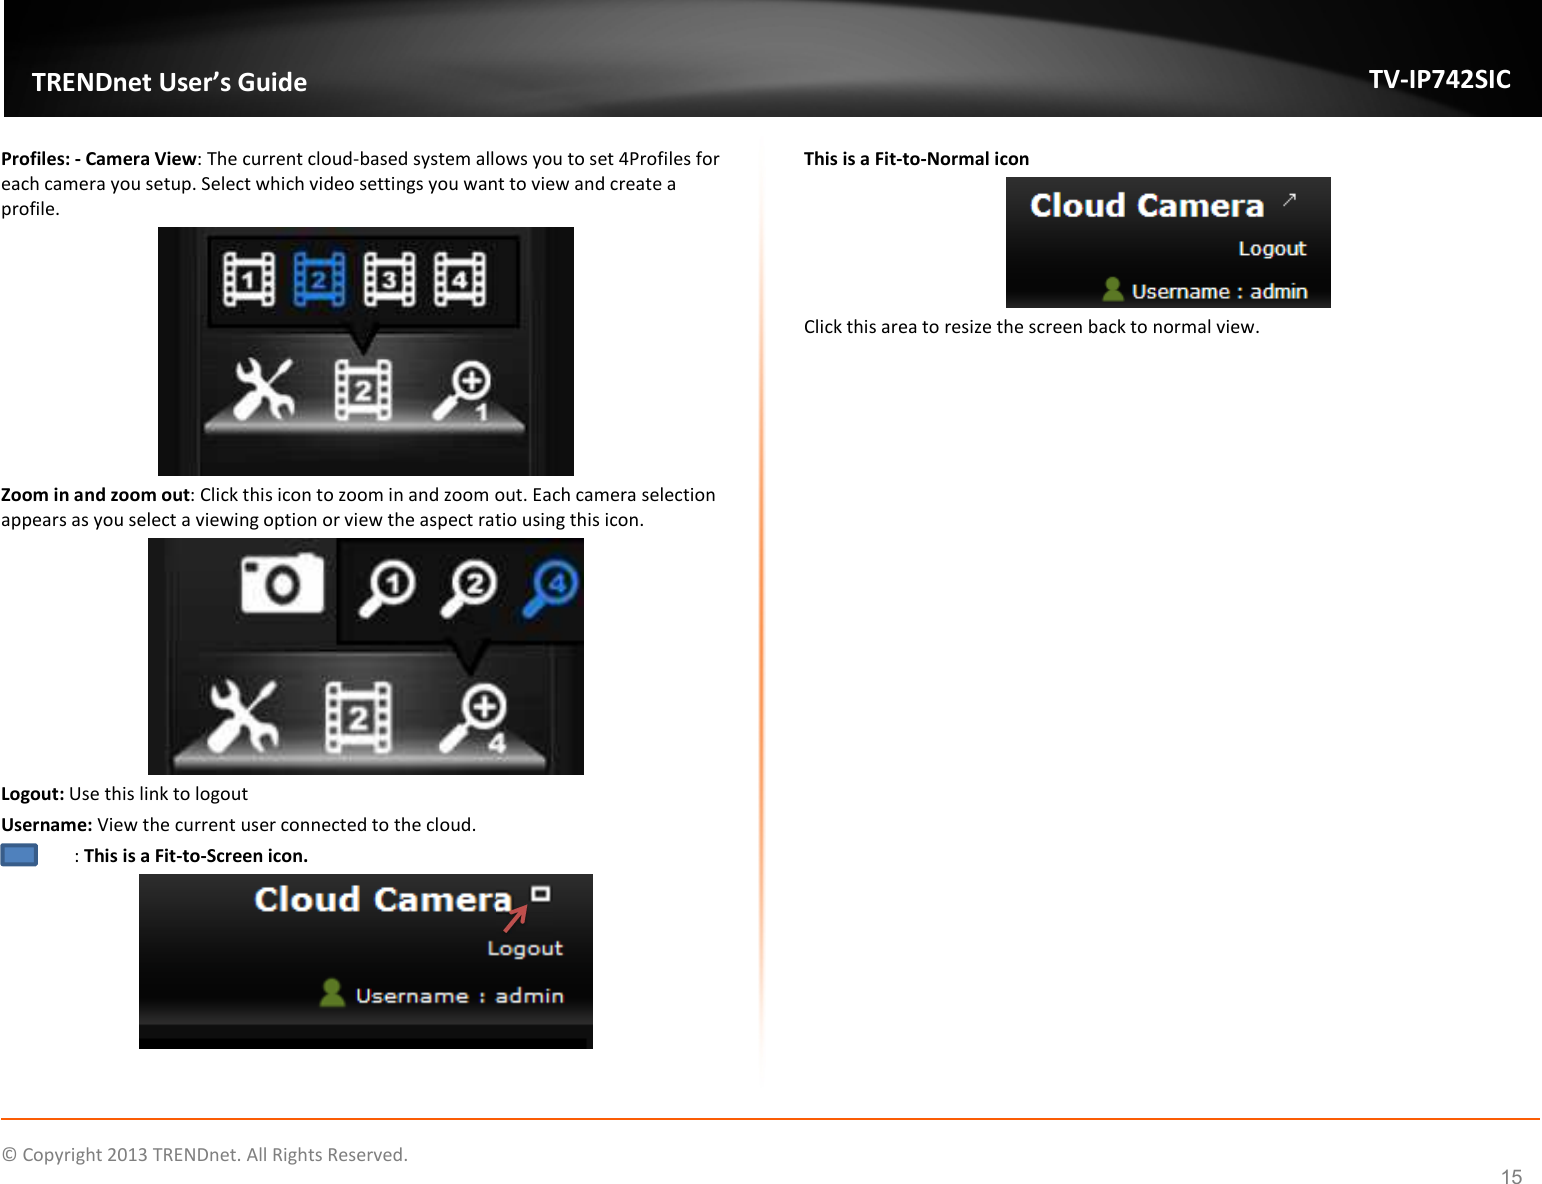    © Copyright 2013 TRENDnet. All Rights Reserved.   TRENDnet User’s Guide TV-IP742SIC 15 Profiles: - Camera View: The current cloud-based system allows you to set 4Profiles for each camera you setup. Select which video settings you want to view and create a profile.  Zoom in and zoom out: Click this icon to zoom in and zoom out. Each camera selection appears as you select a viewing option or view the aspect ratio using this icon.  Logout: Use this link to logout Username: View the current user connected to the cloud.   : This is a Fit-to-Screen icon.   This is a Fit-to-Normal icon  Click this area to resize the screen back to normal view.       